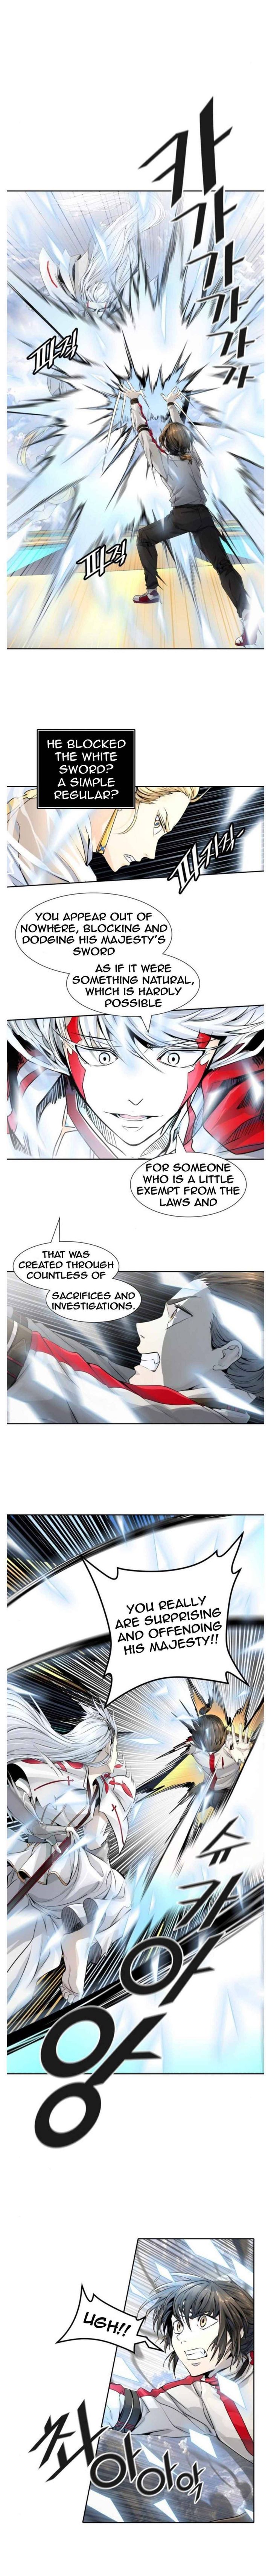 Tower Of God 496 11